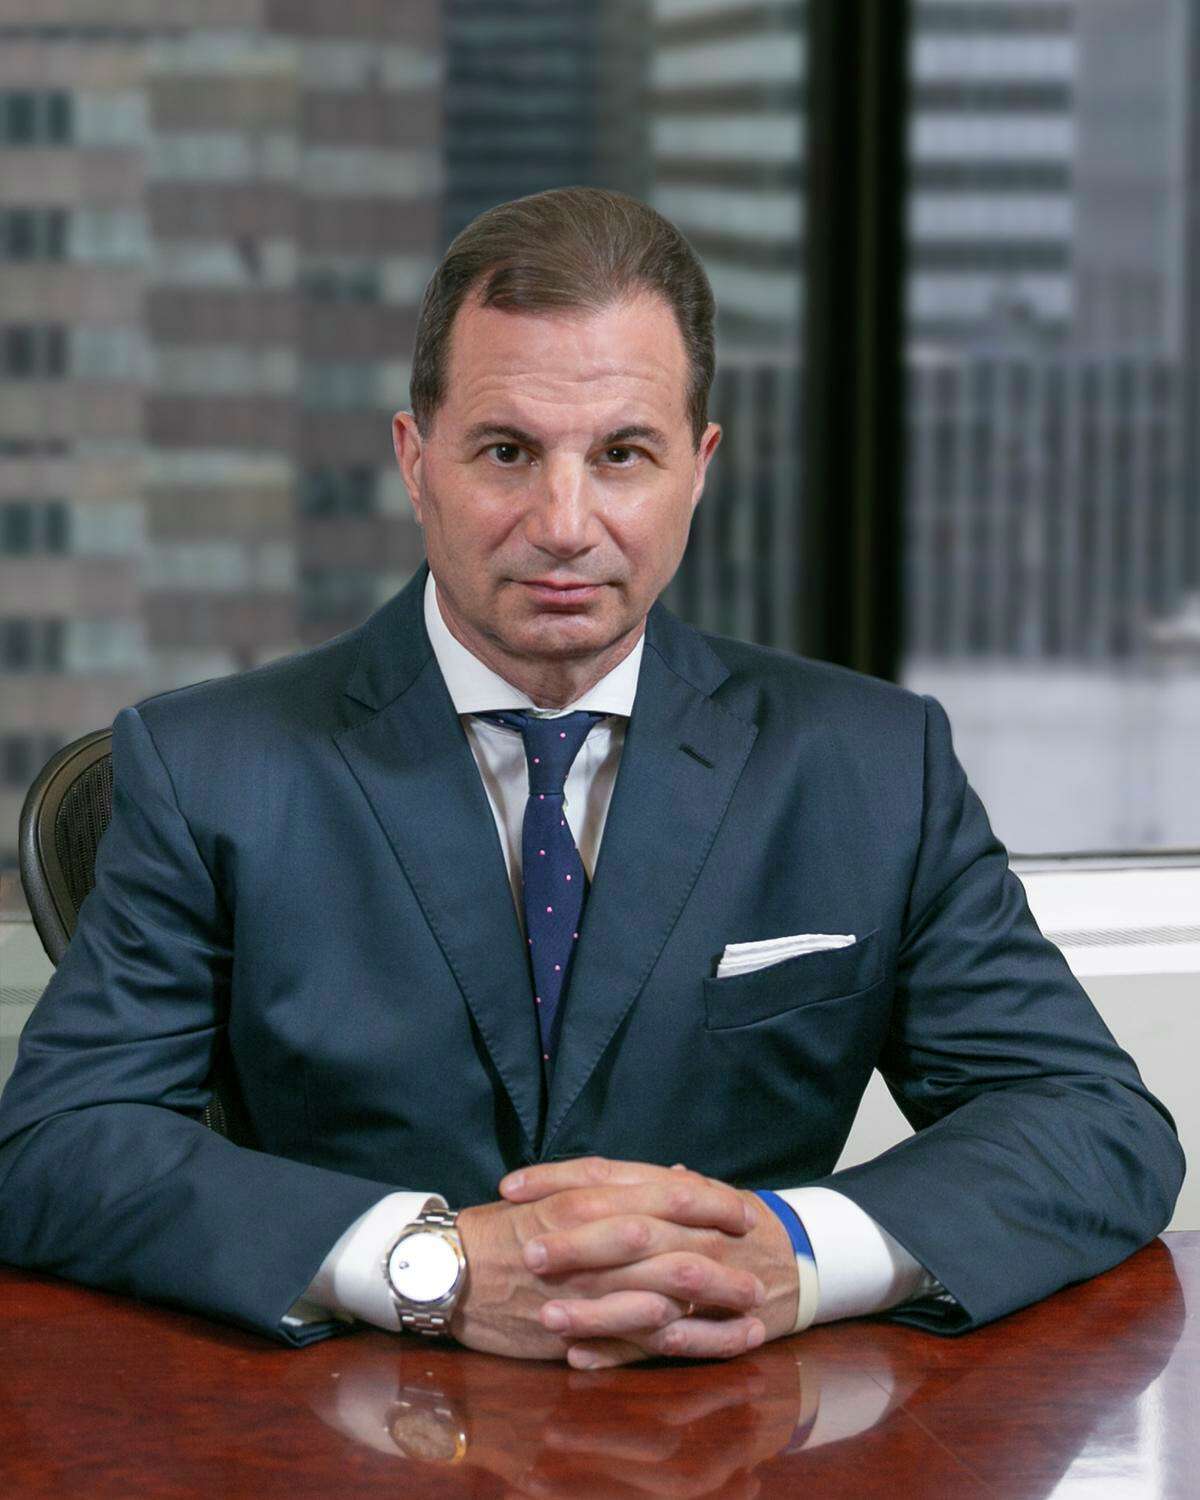 Peter Kaufman, president of Gordian Group and head of the firm’s restructuring and distressed M& practice